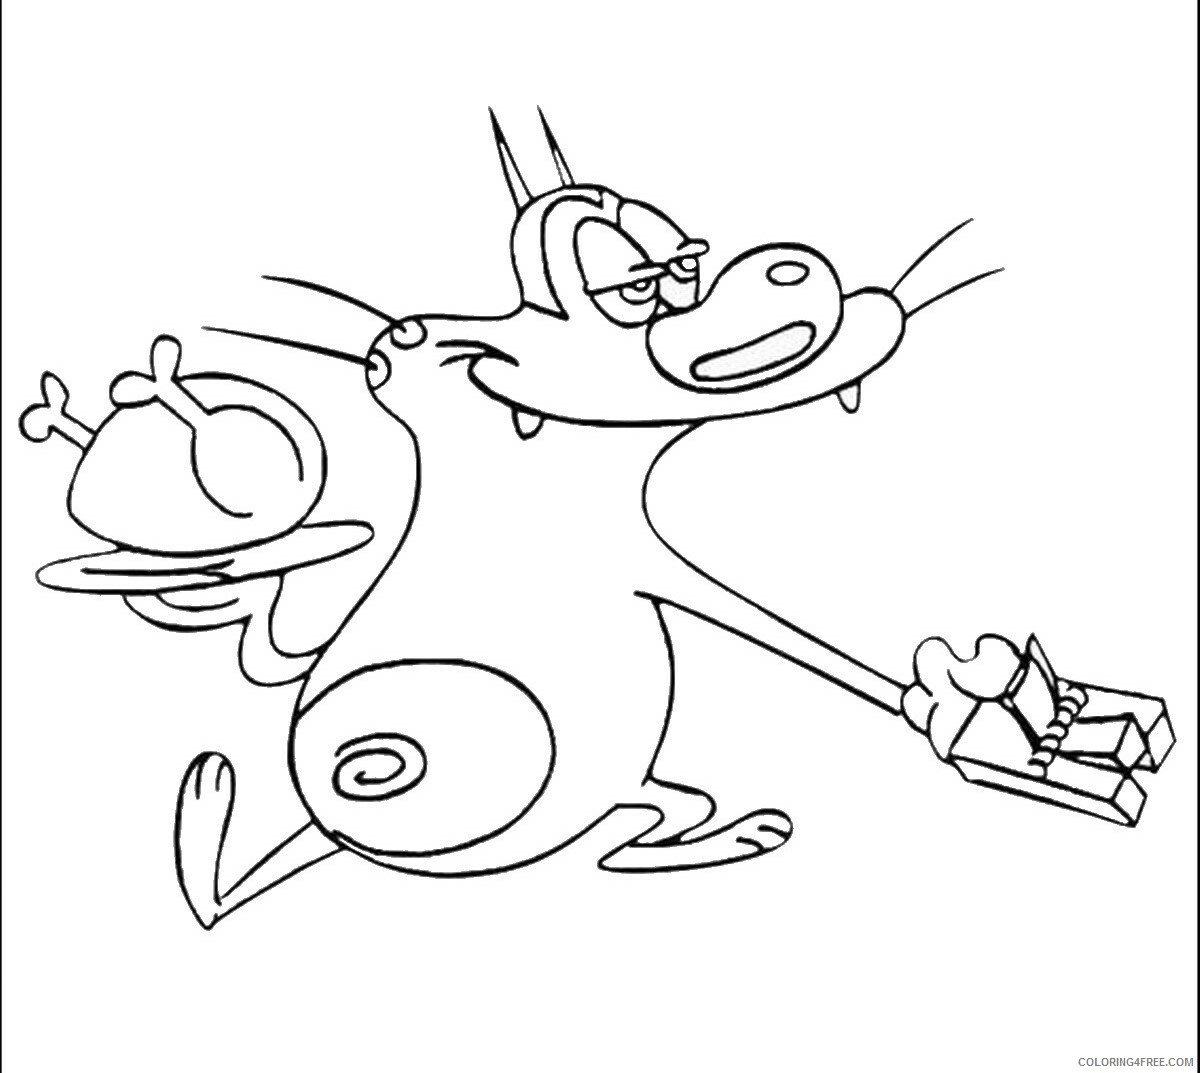 Oggy and the Cockroaches Coloring Pages TV Film Printable 2020 05606 Coloring4free